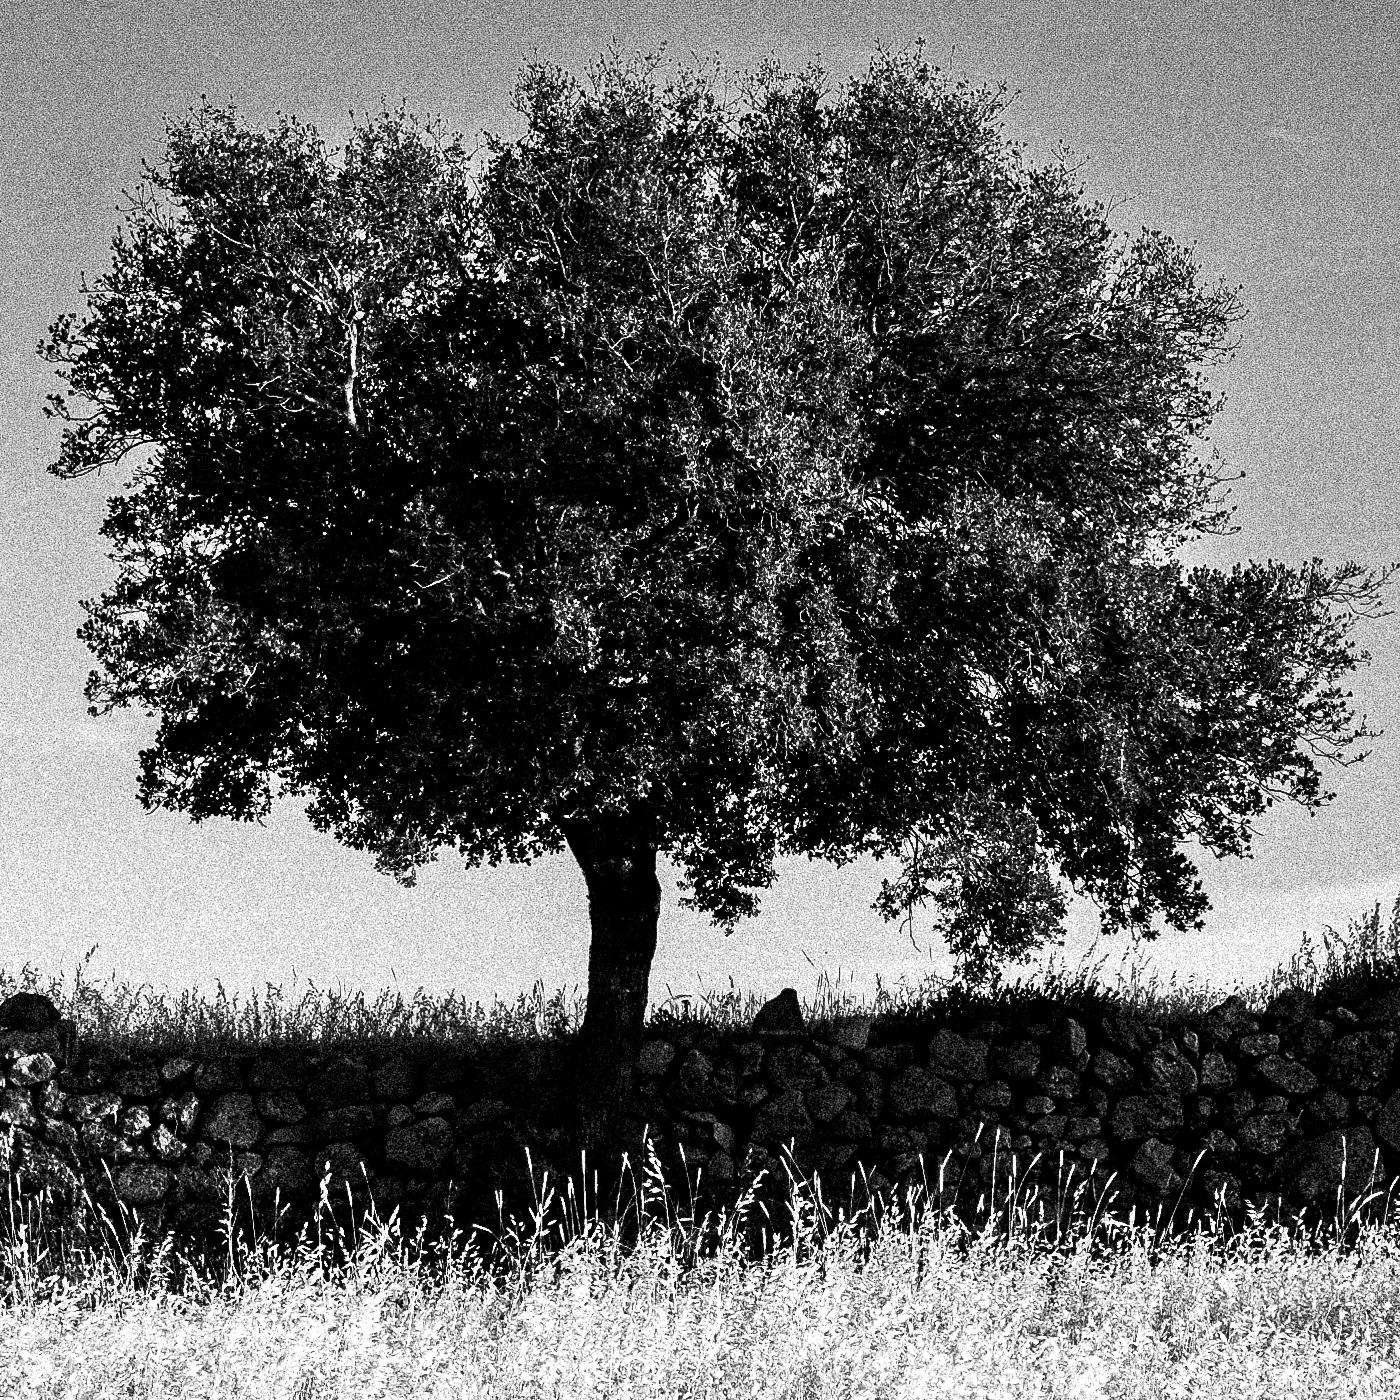 Black and White Photography Wall Art Greece | Field in Geraki village with a tree Lakonia Peloponnese by George Tatakis - detailed view